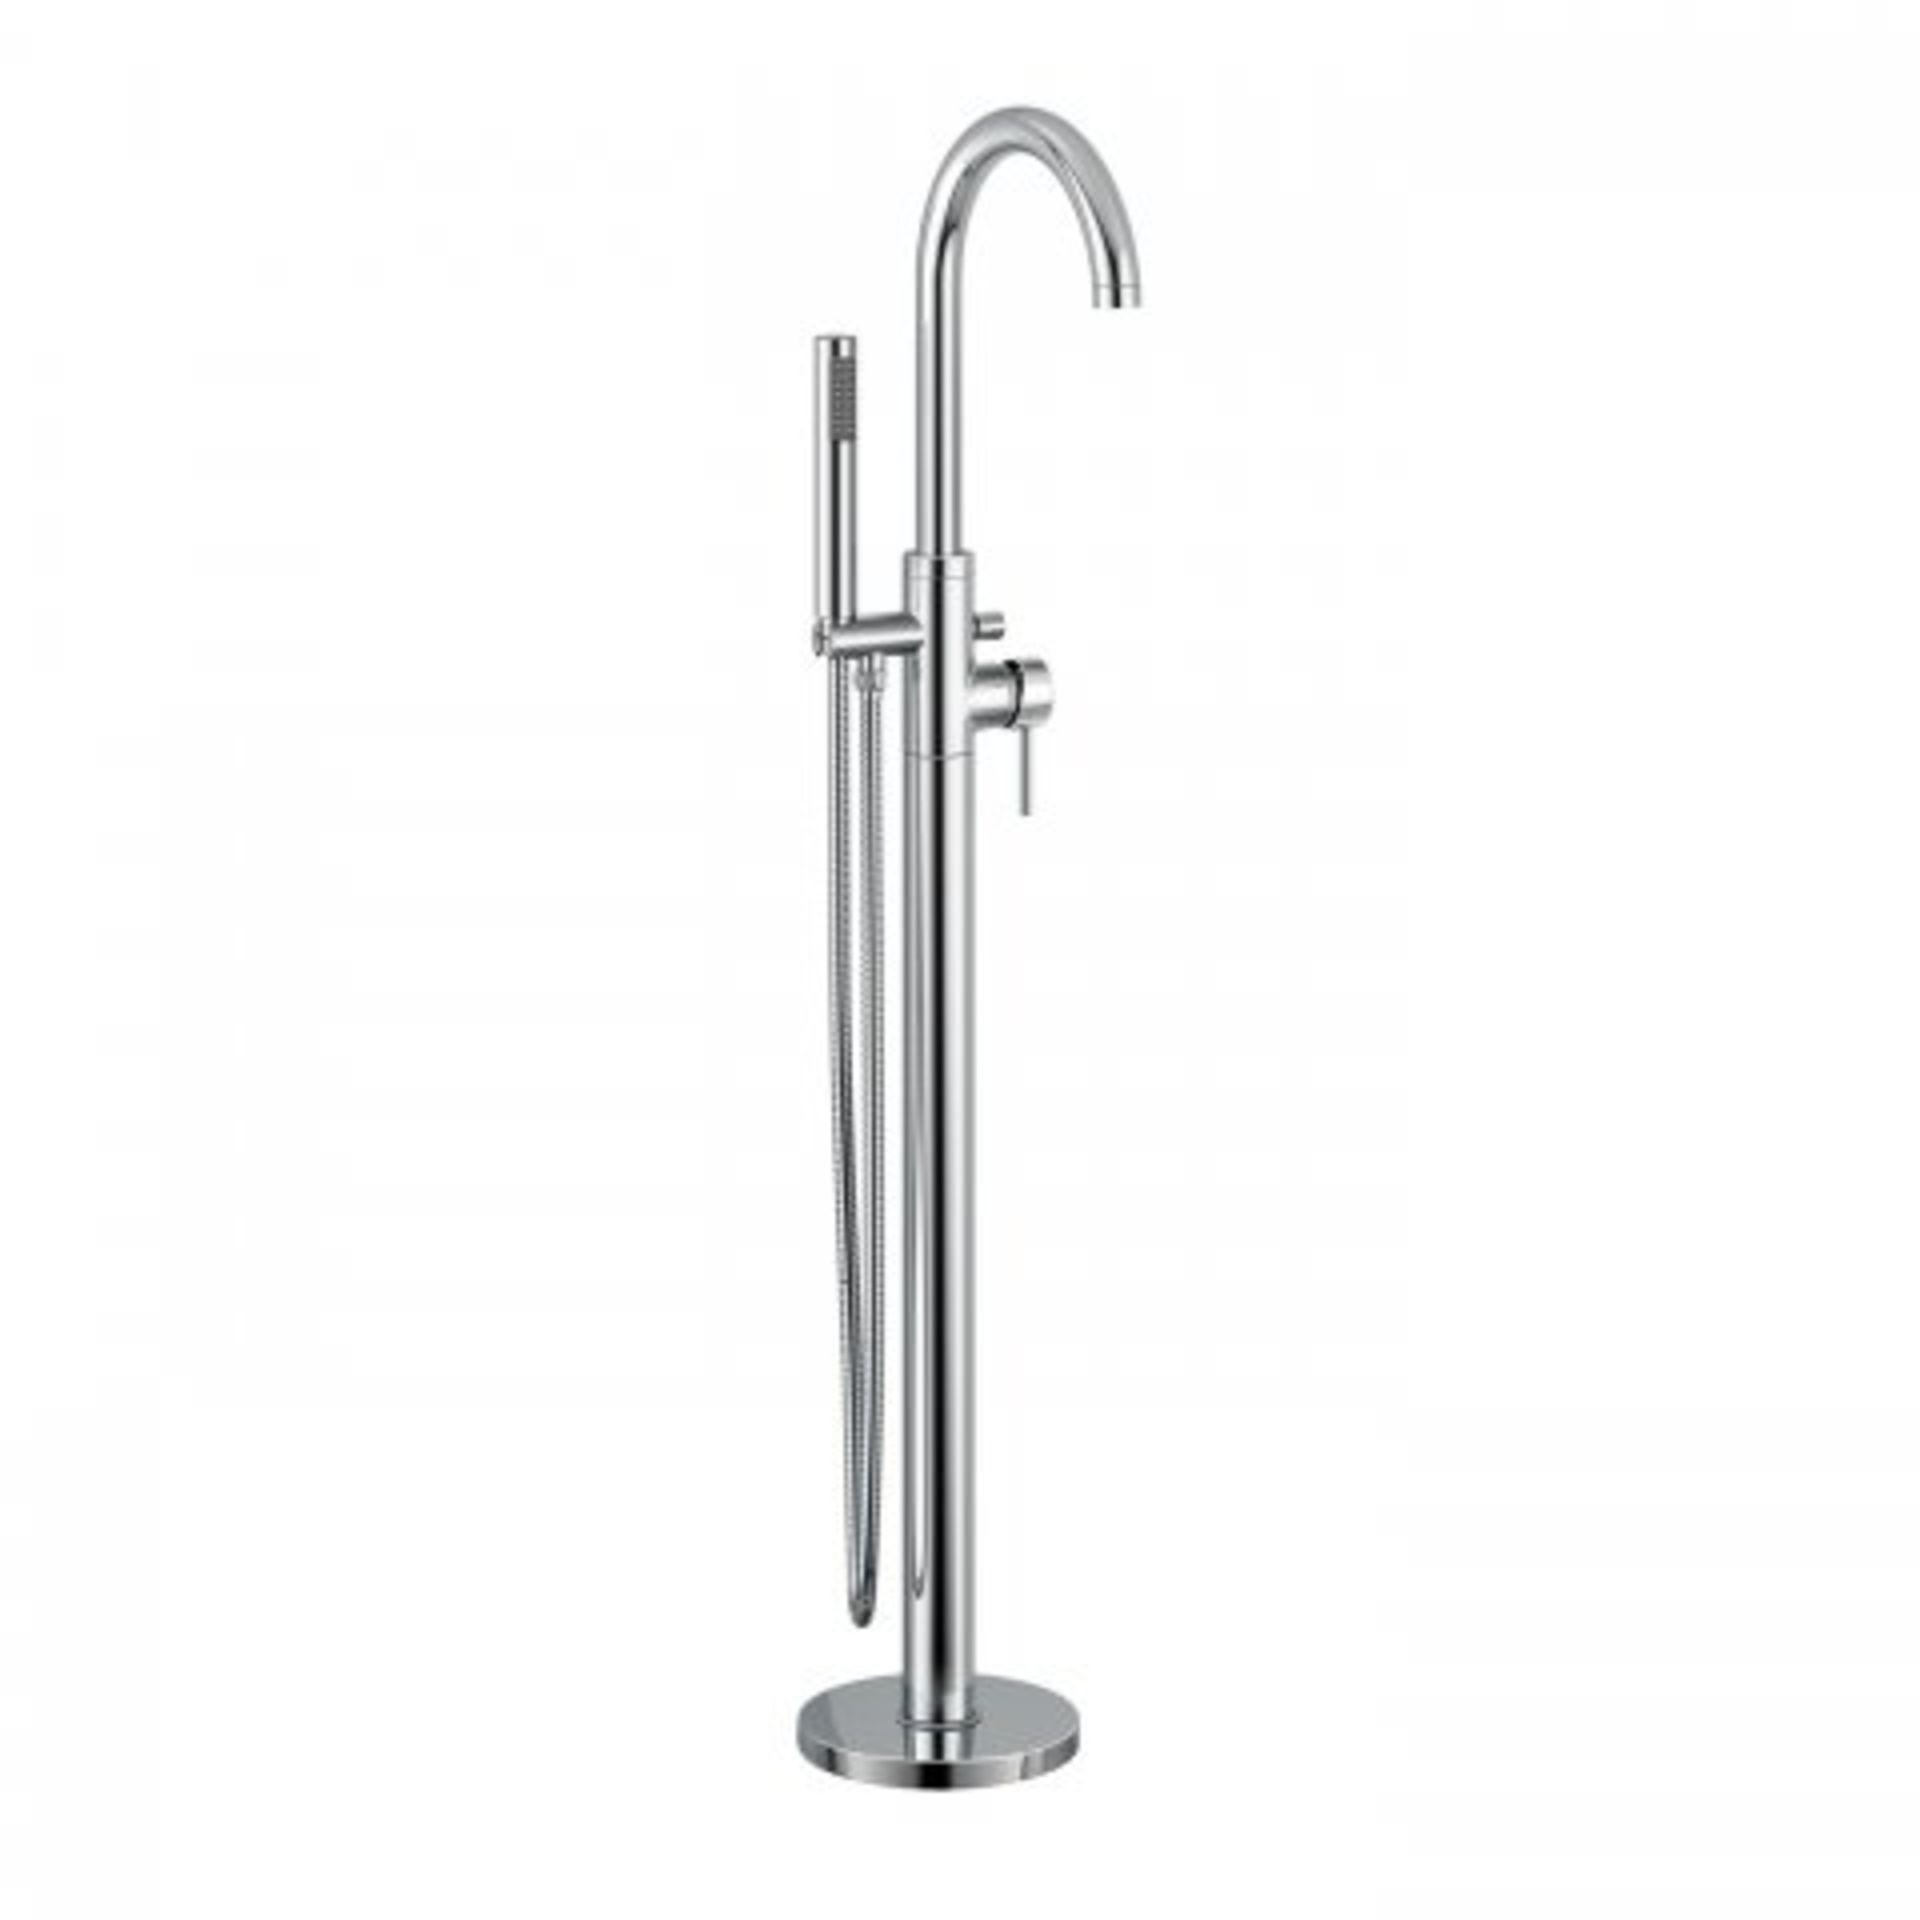 (20) Gladstone II Freestanding Bath Mixer Tap with Hand Held Shower Head Simplicity at its best: Our - Image 5 of 5